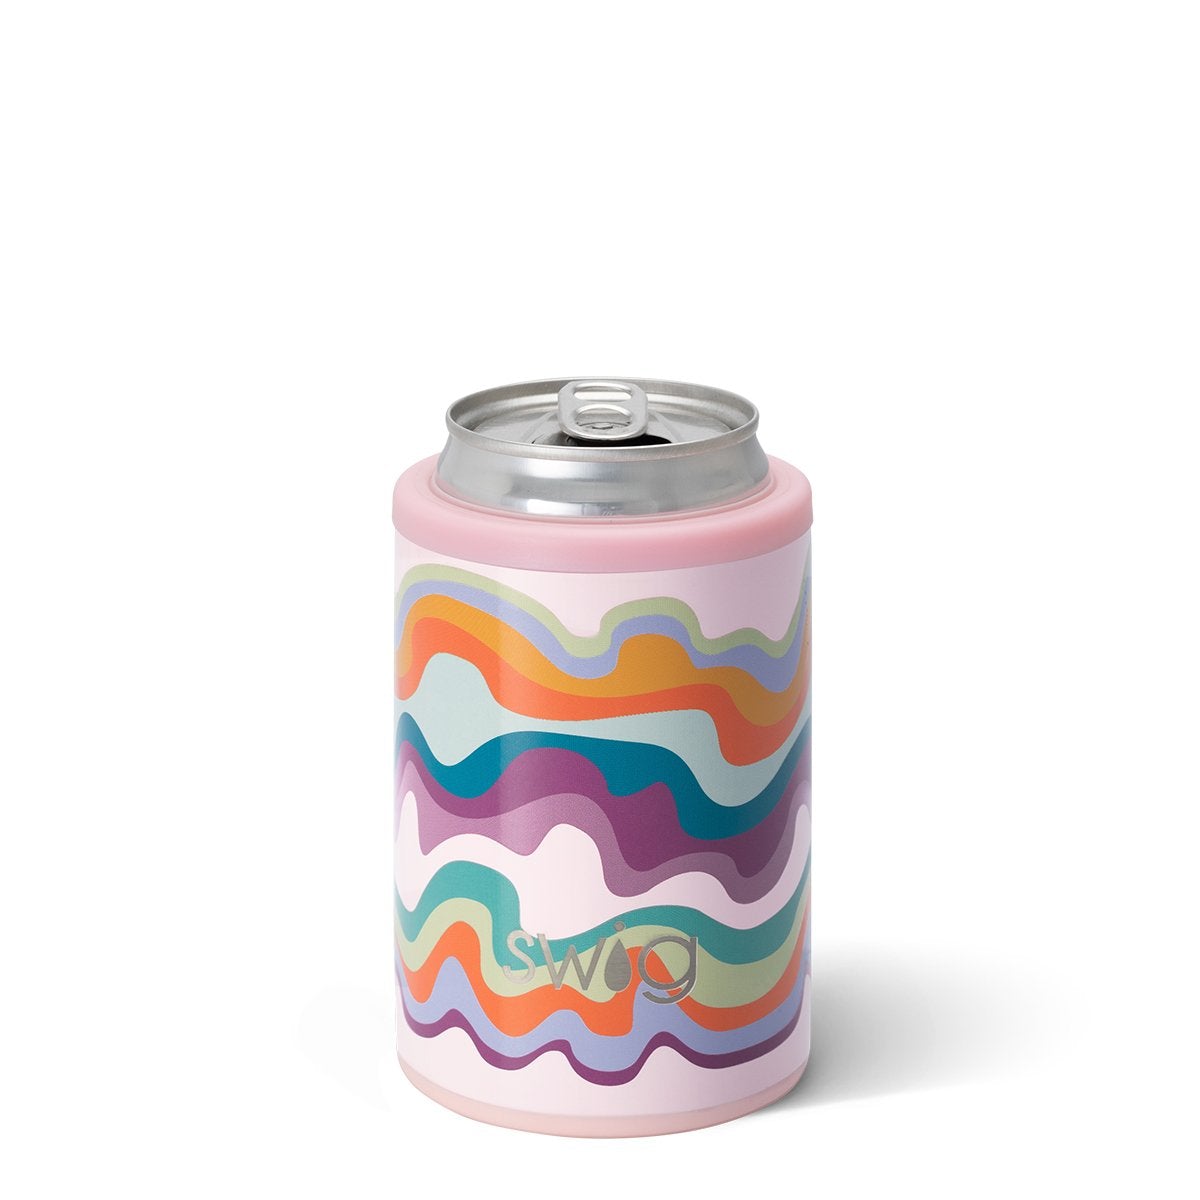 SWIG- Home Fir The Holidays Skinny Can Cooler